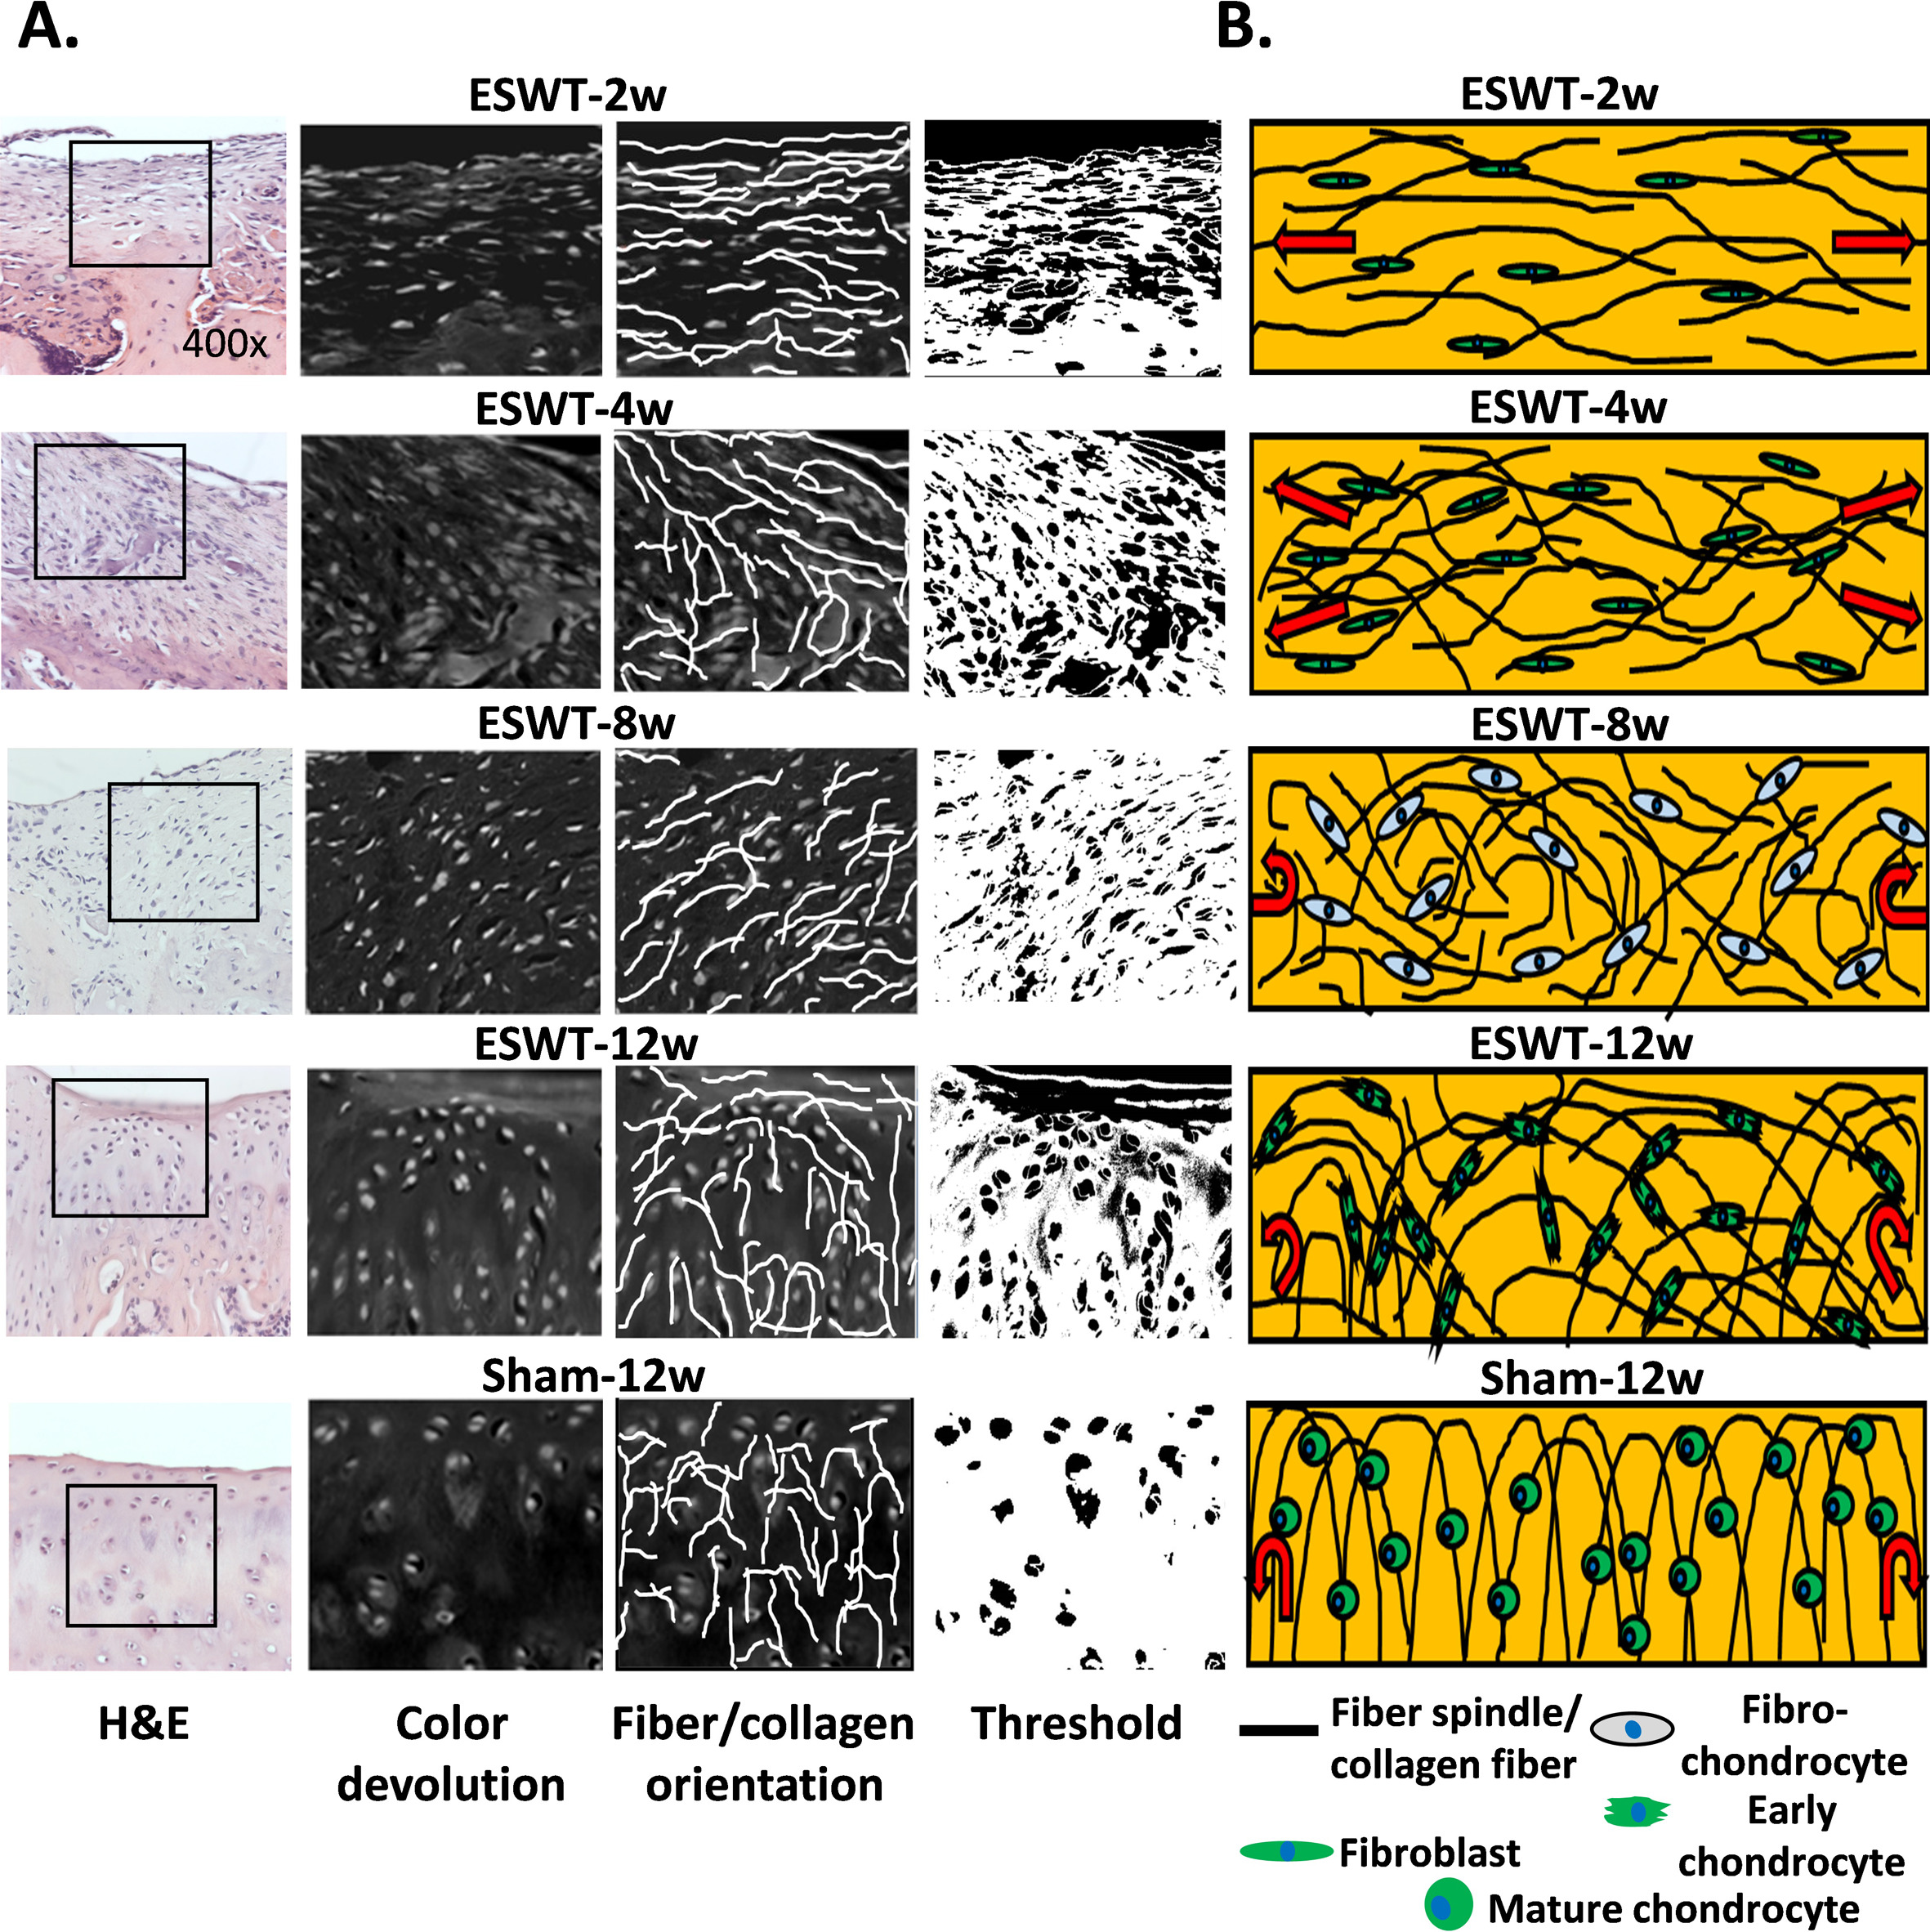 Fig. 3 
            The data demonstrate the regenerative dynamics of hyaline cartilage following extracorporeal shockwave therapy (ESWT) in osteochondral defect lesions over a two- to 12-week period. a) Assessment of cartilage conditions involves evaluating chondrogenesis (depicted through colour devolution columns) and collagen fibre alignment (represented by orientation and threshold columns). b) Schematic diagrams illustrate the processes of cartilage repair and chondrogenesis. H&E, haematoxylin and eosin.
          